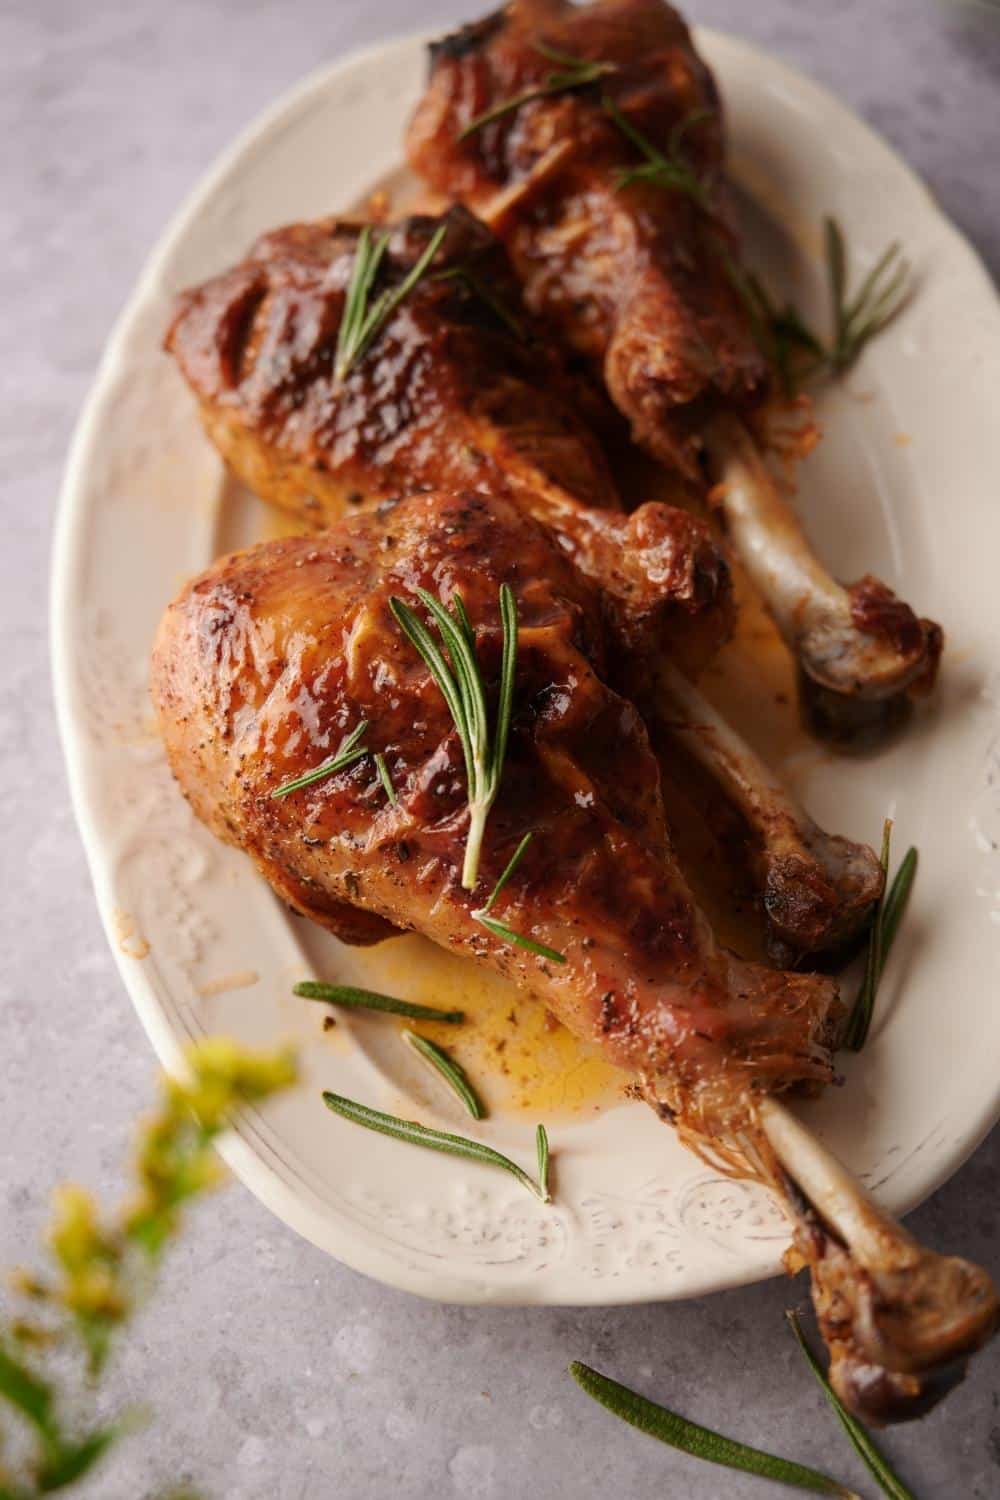 Three roasted turkey legs on an oval embossed plate garnished with rosemary leaves and cooking juices. A few small yellow flower buds can be seen in the foreground.